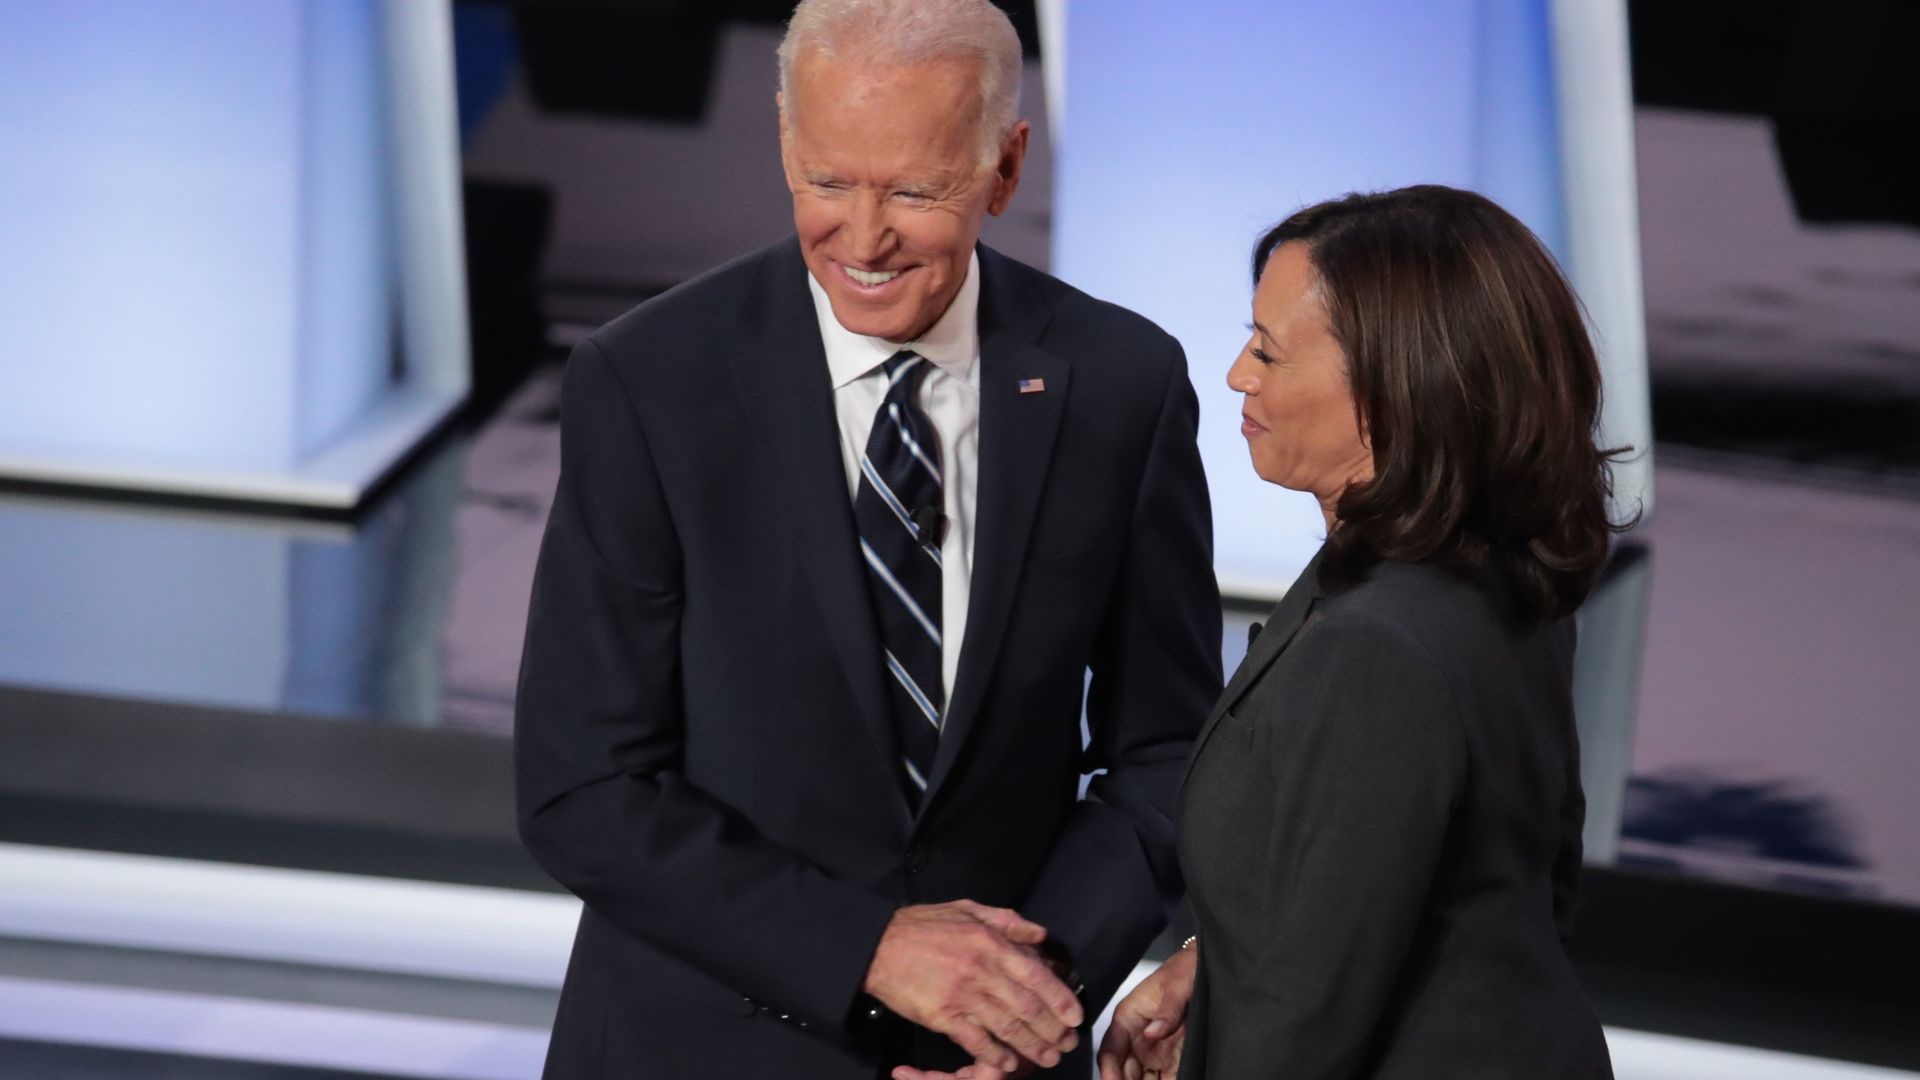 In this image, Biden and Harris shake hands and smile.